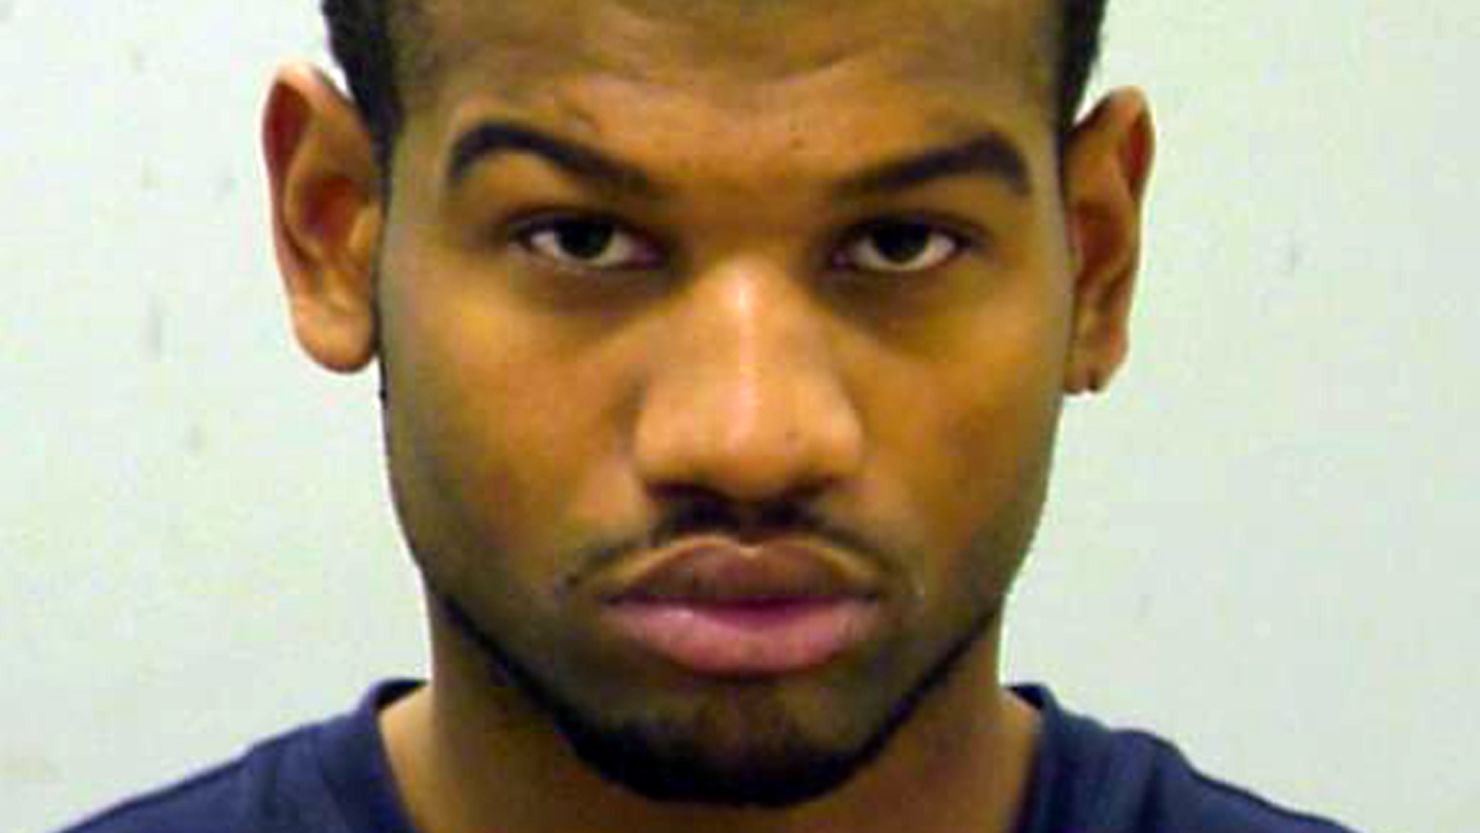 Andre Curry, 21, has been charged with aggravated domestic battery, Chicago police said.